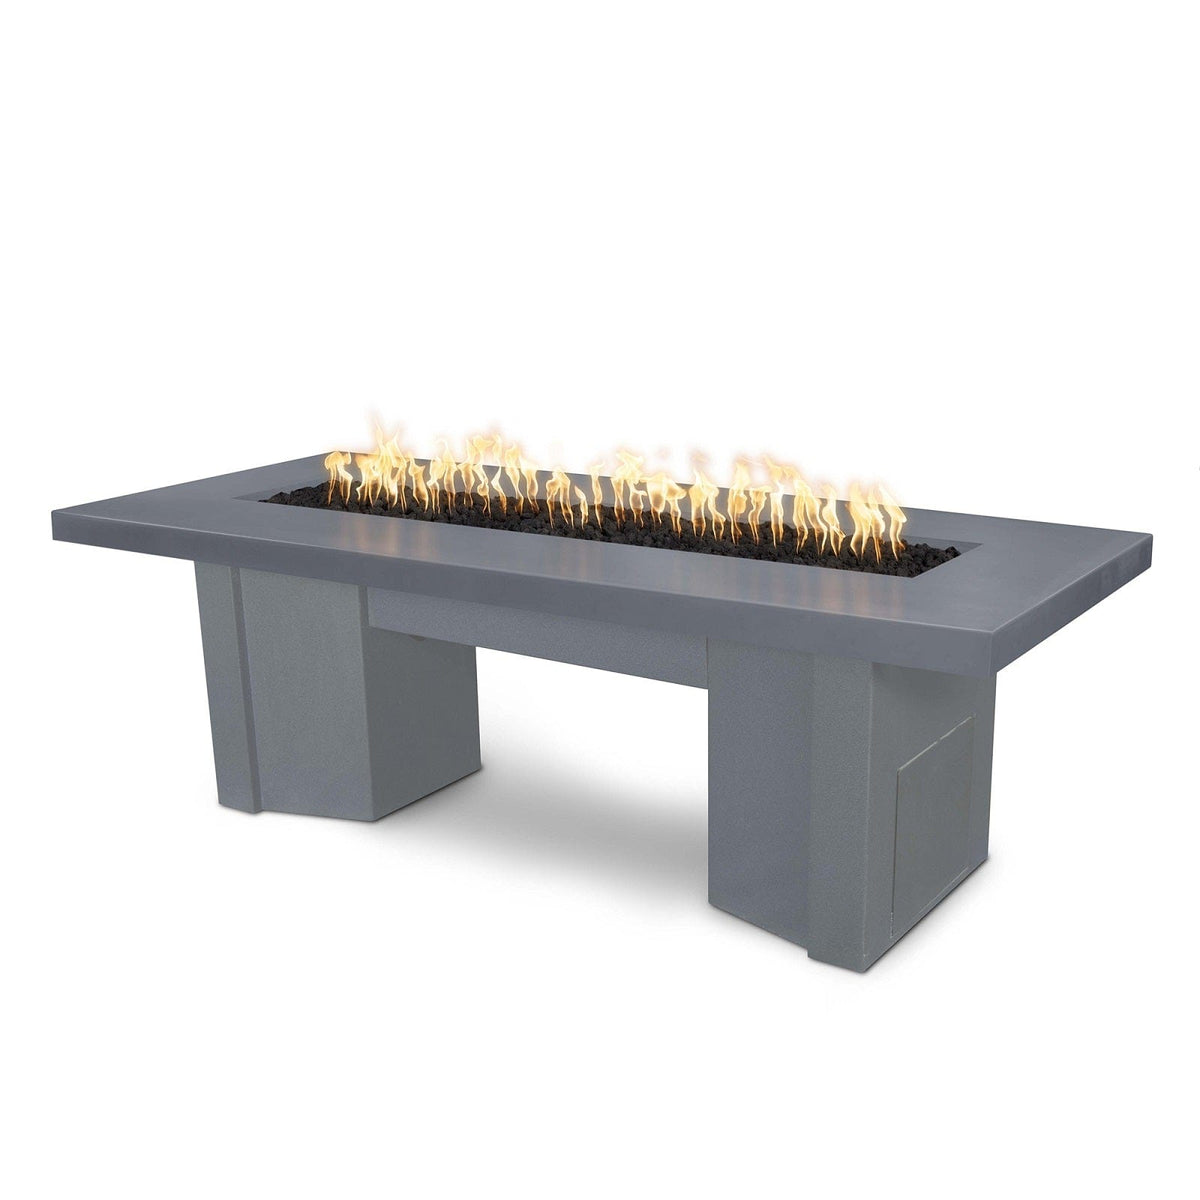 The Outdoor Plus Fire Features Gray (-GRY) / Gray Powder Coated Steel (-GRY) The Outdoor Plus 60&quot; Alameda Fire Table Smooth Concrete in Liquid Propane - Match Lit with Flame Sense System / OPT-ALMGFRC60FSML-LP